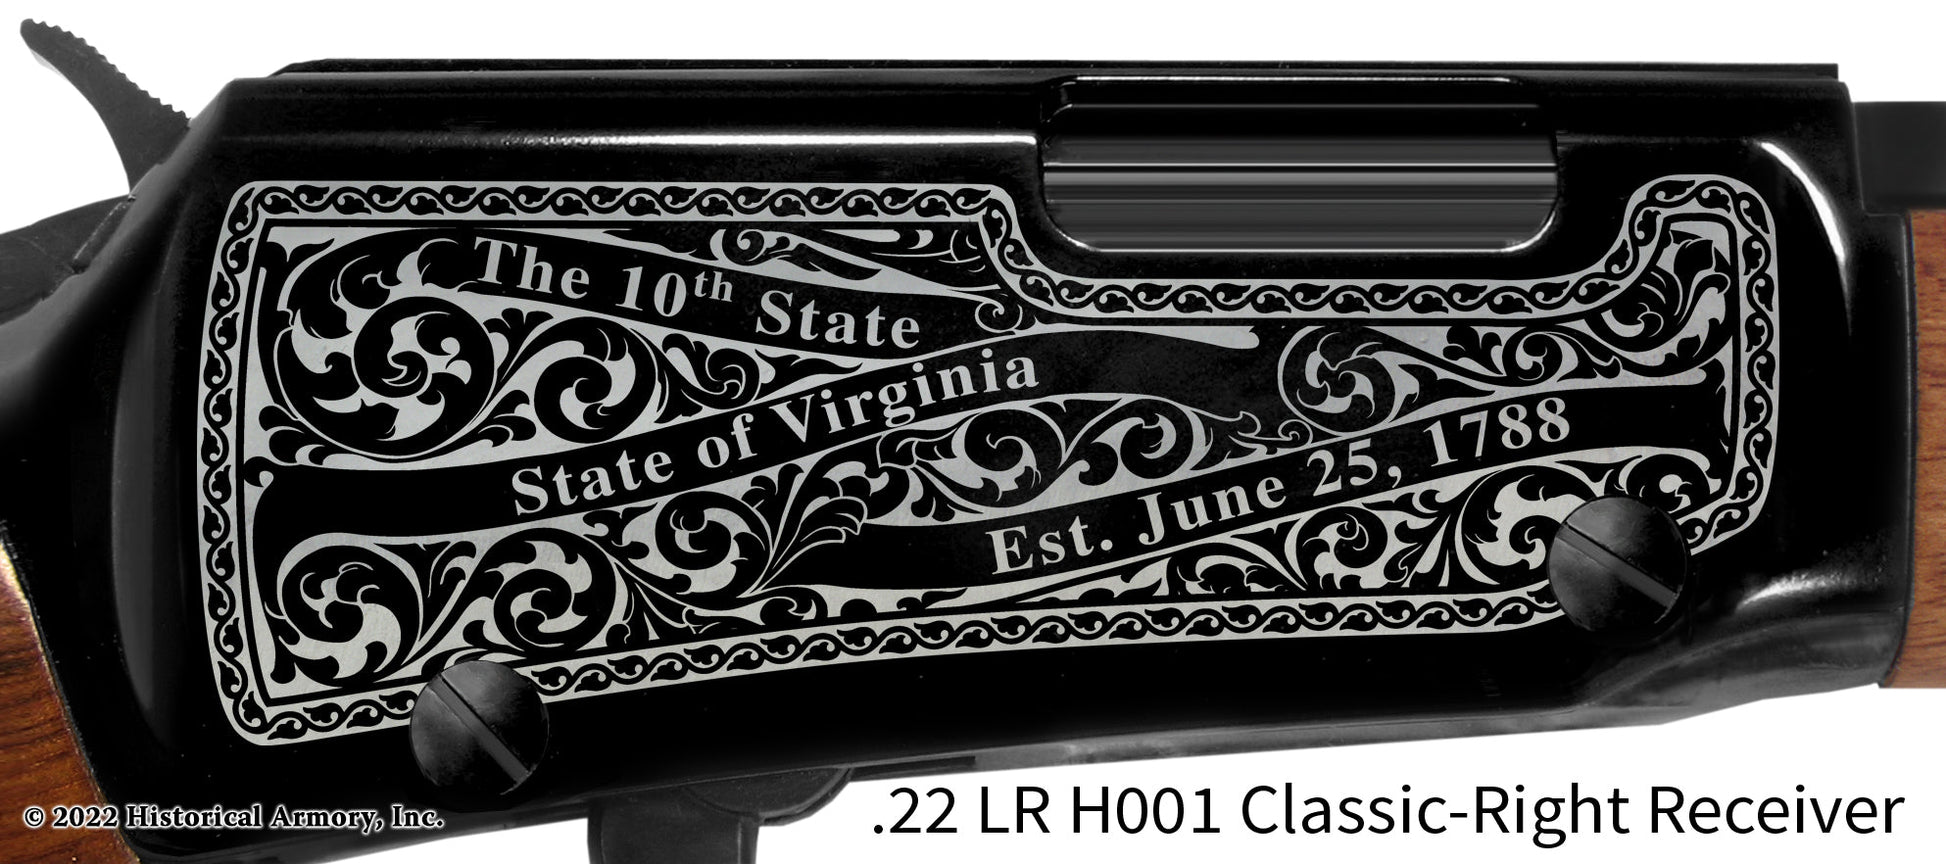 Mecklenburg County Virginia Engraved Henry H001 Rifle